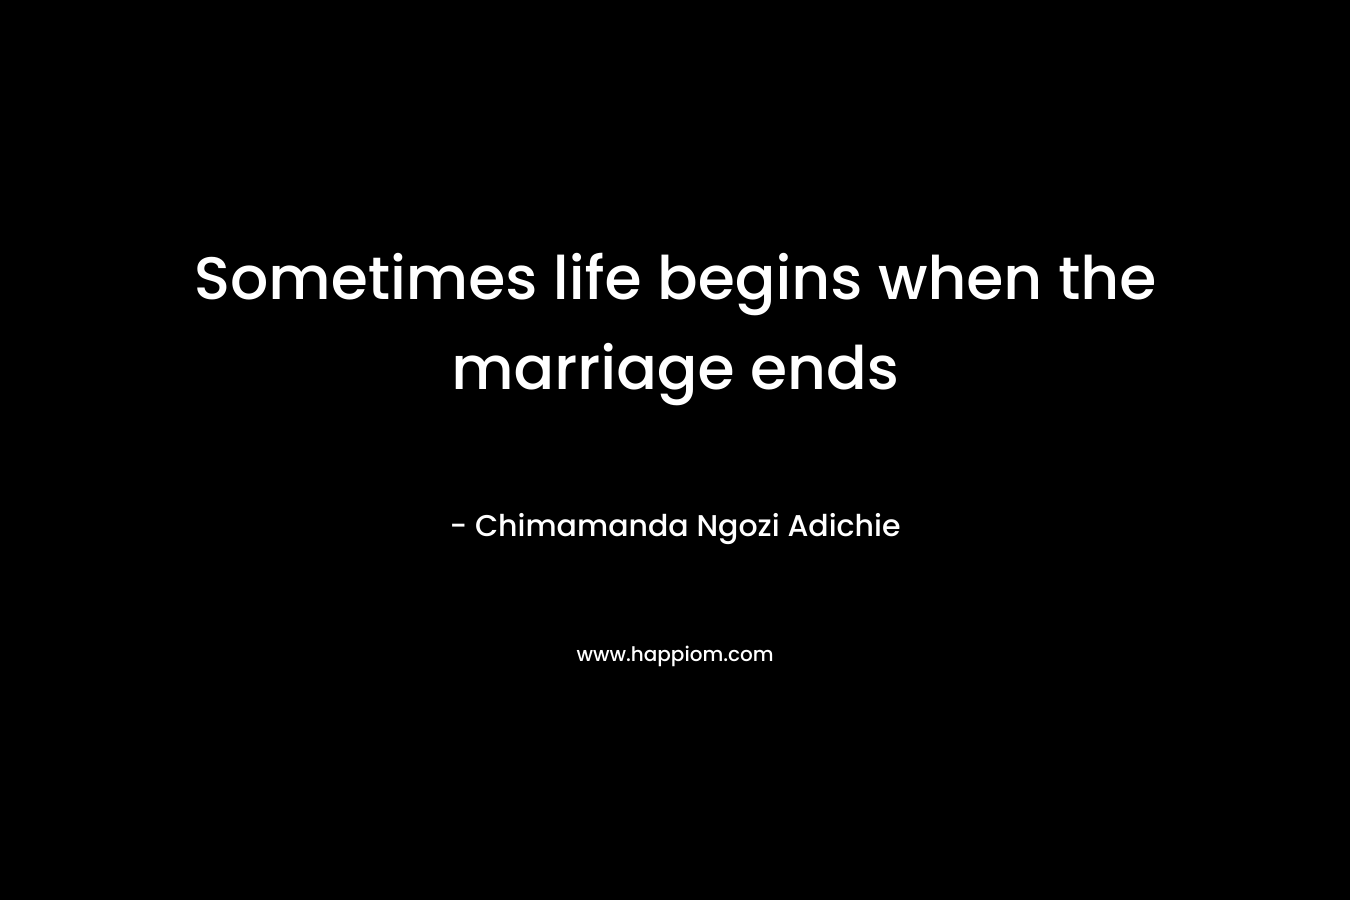 Sometimes life begins when the marriage ends